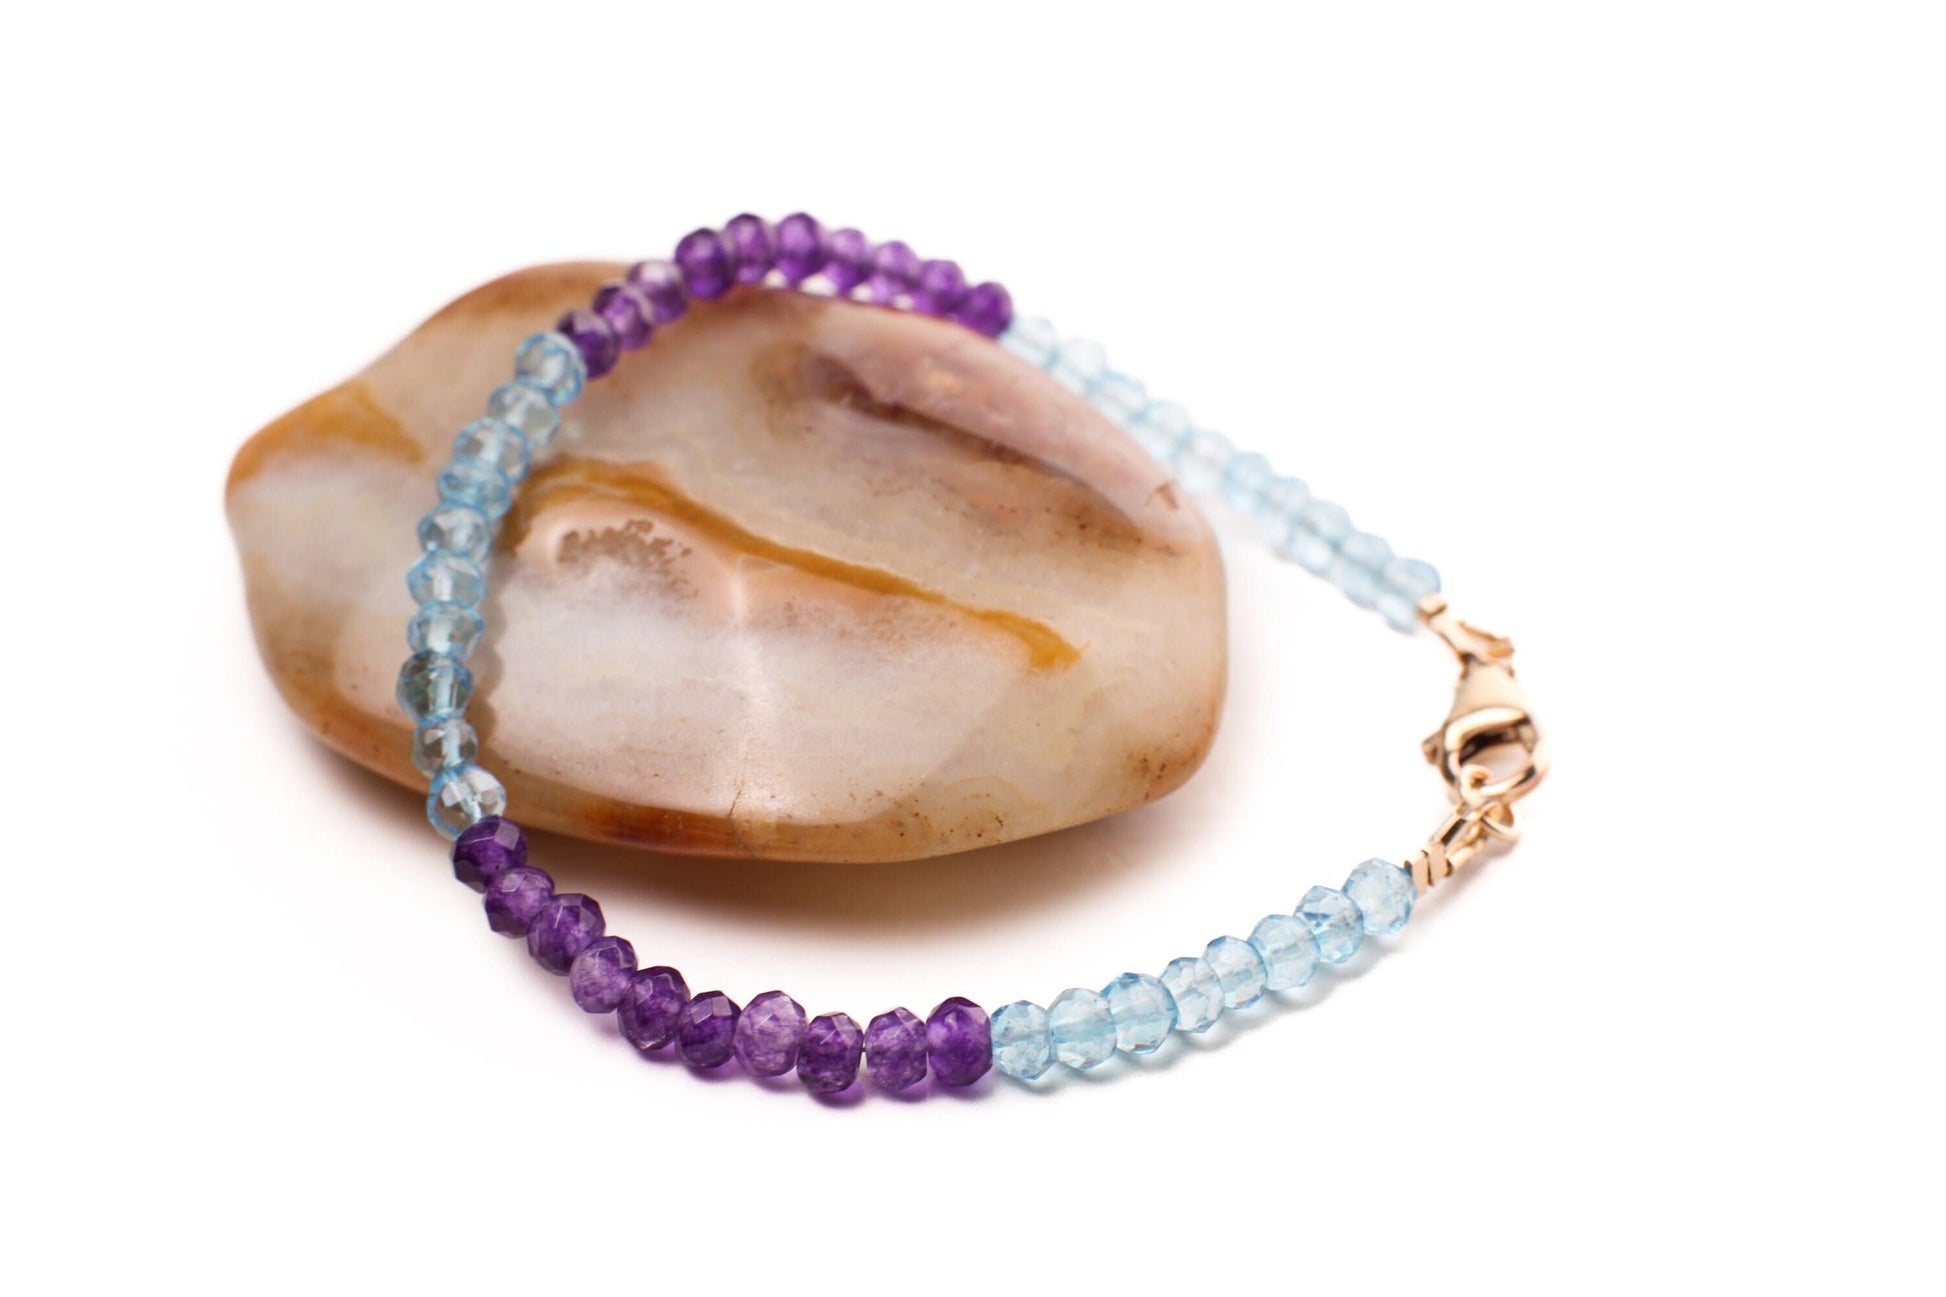 Amethyst, Blue Topaz 4mm Faceted Bracelet in 14k Gold Filled lobster Clasp and Findings, Healing Chakra gift